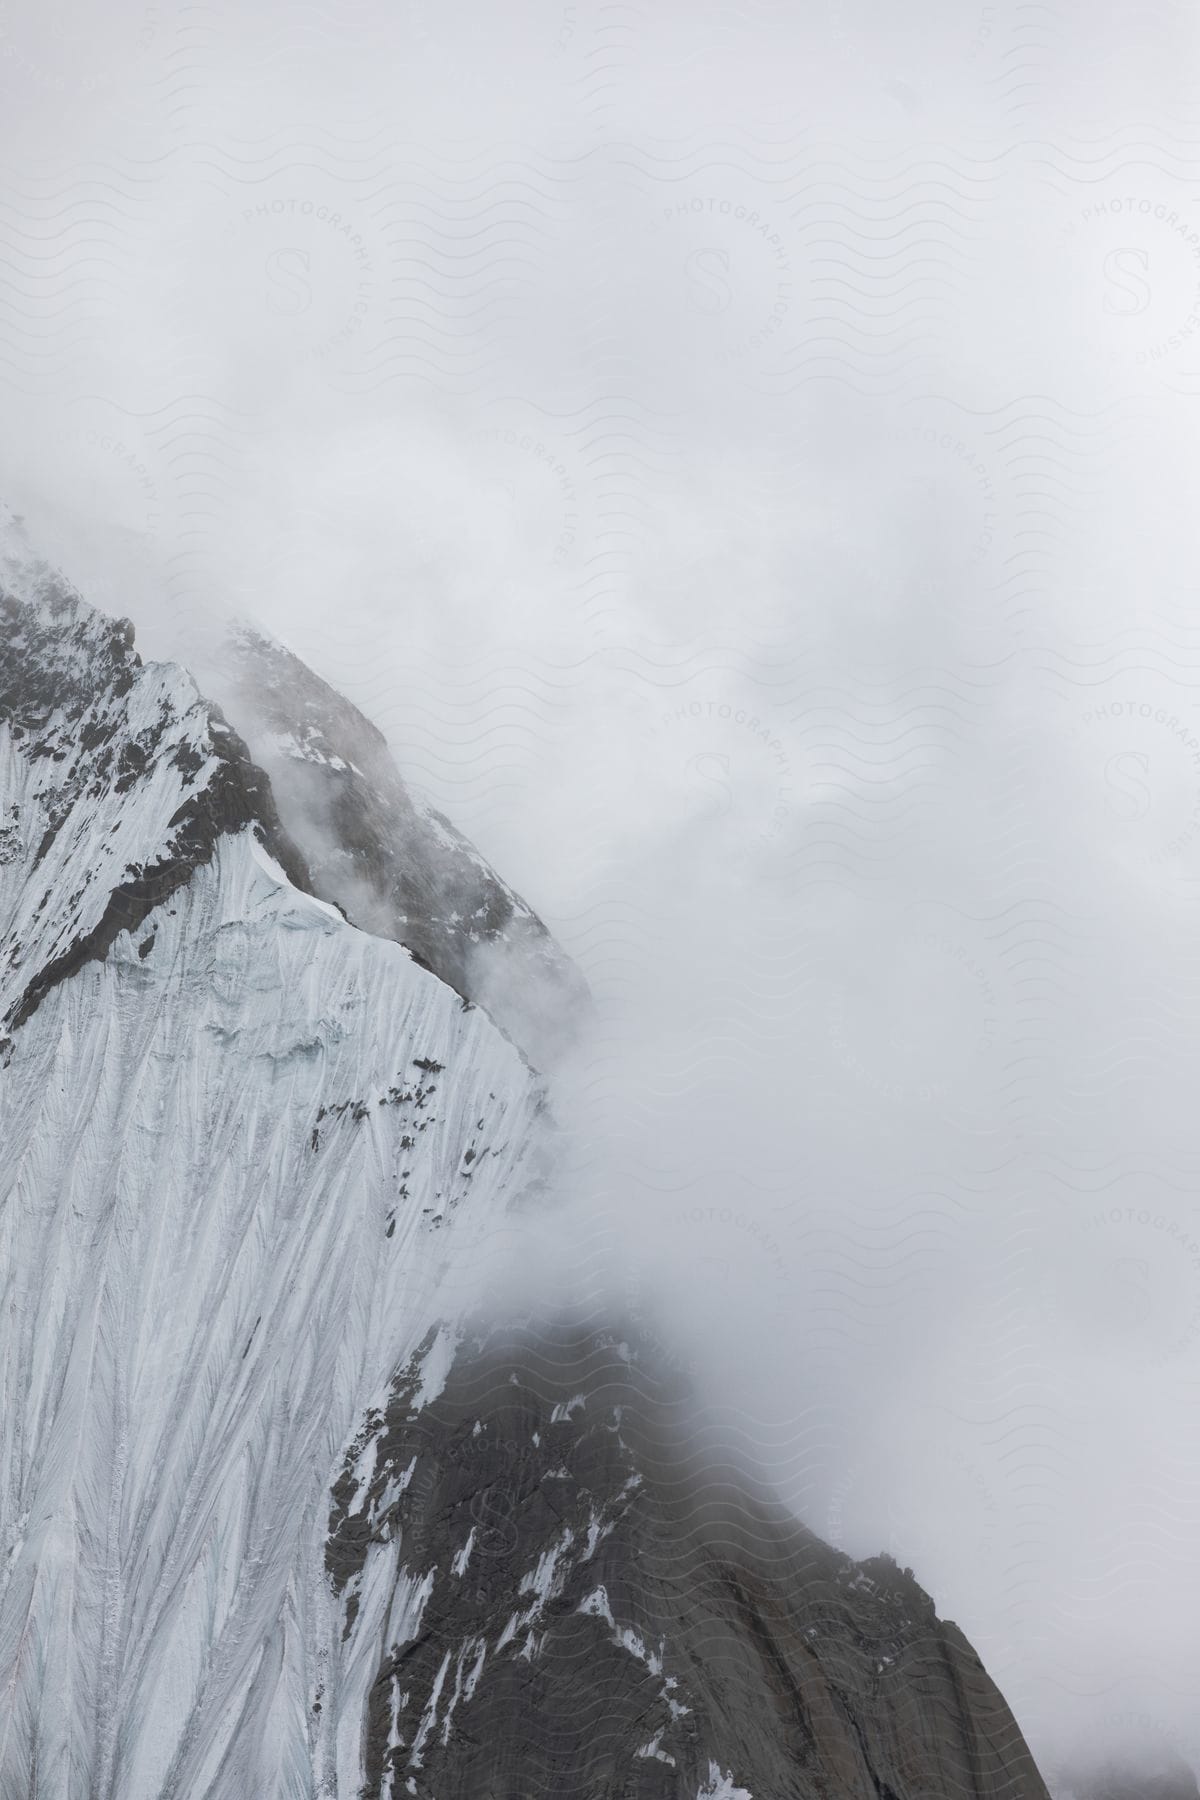 A snowy mountain cliff surrounded by clouds in the karakoram mountain range in pakistan